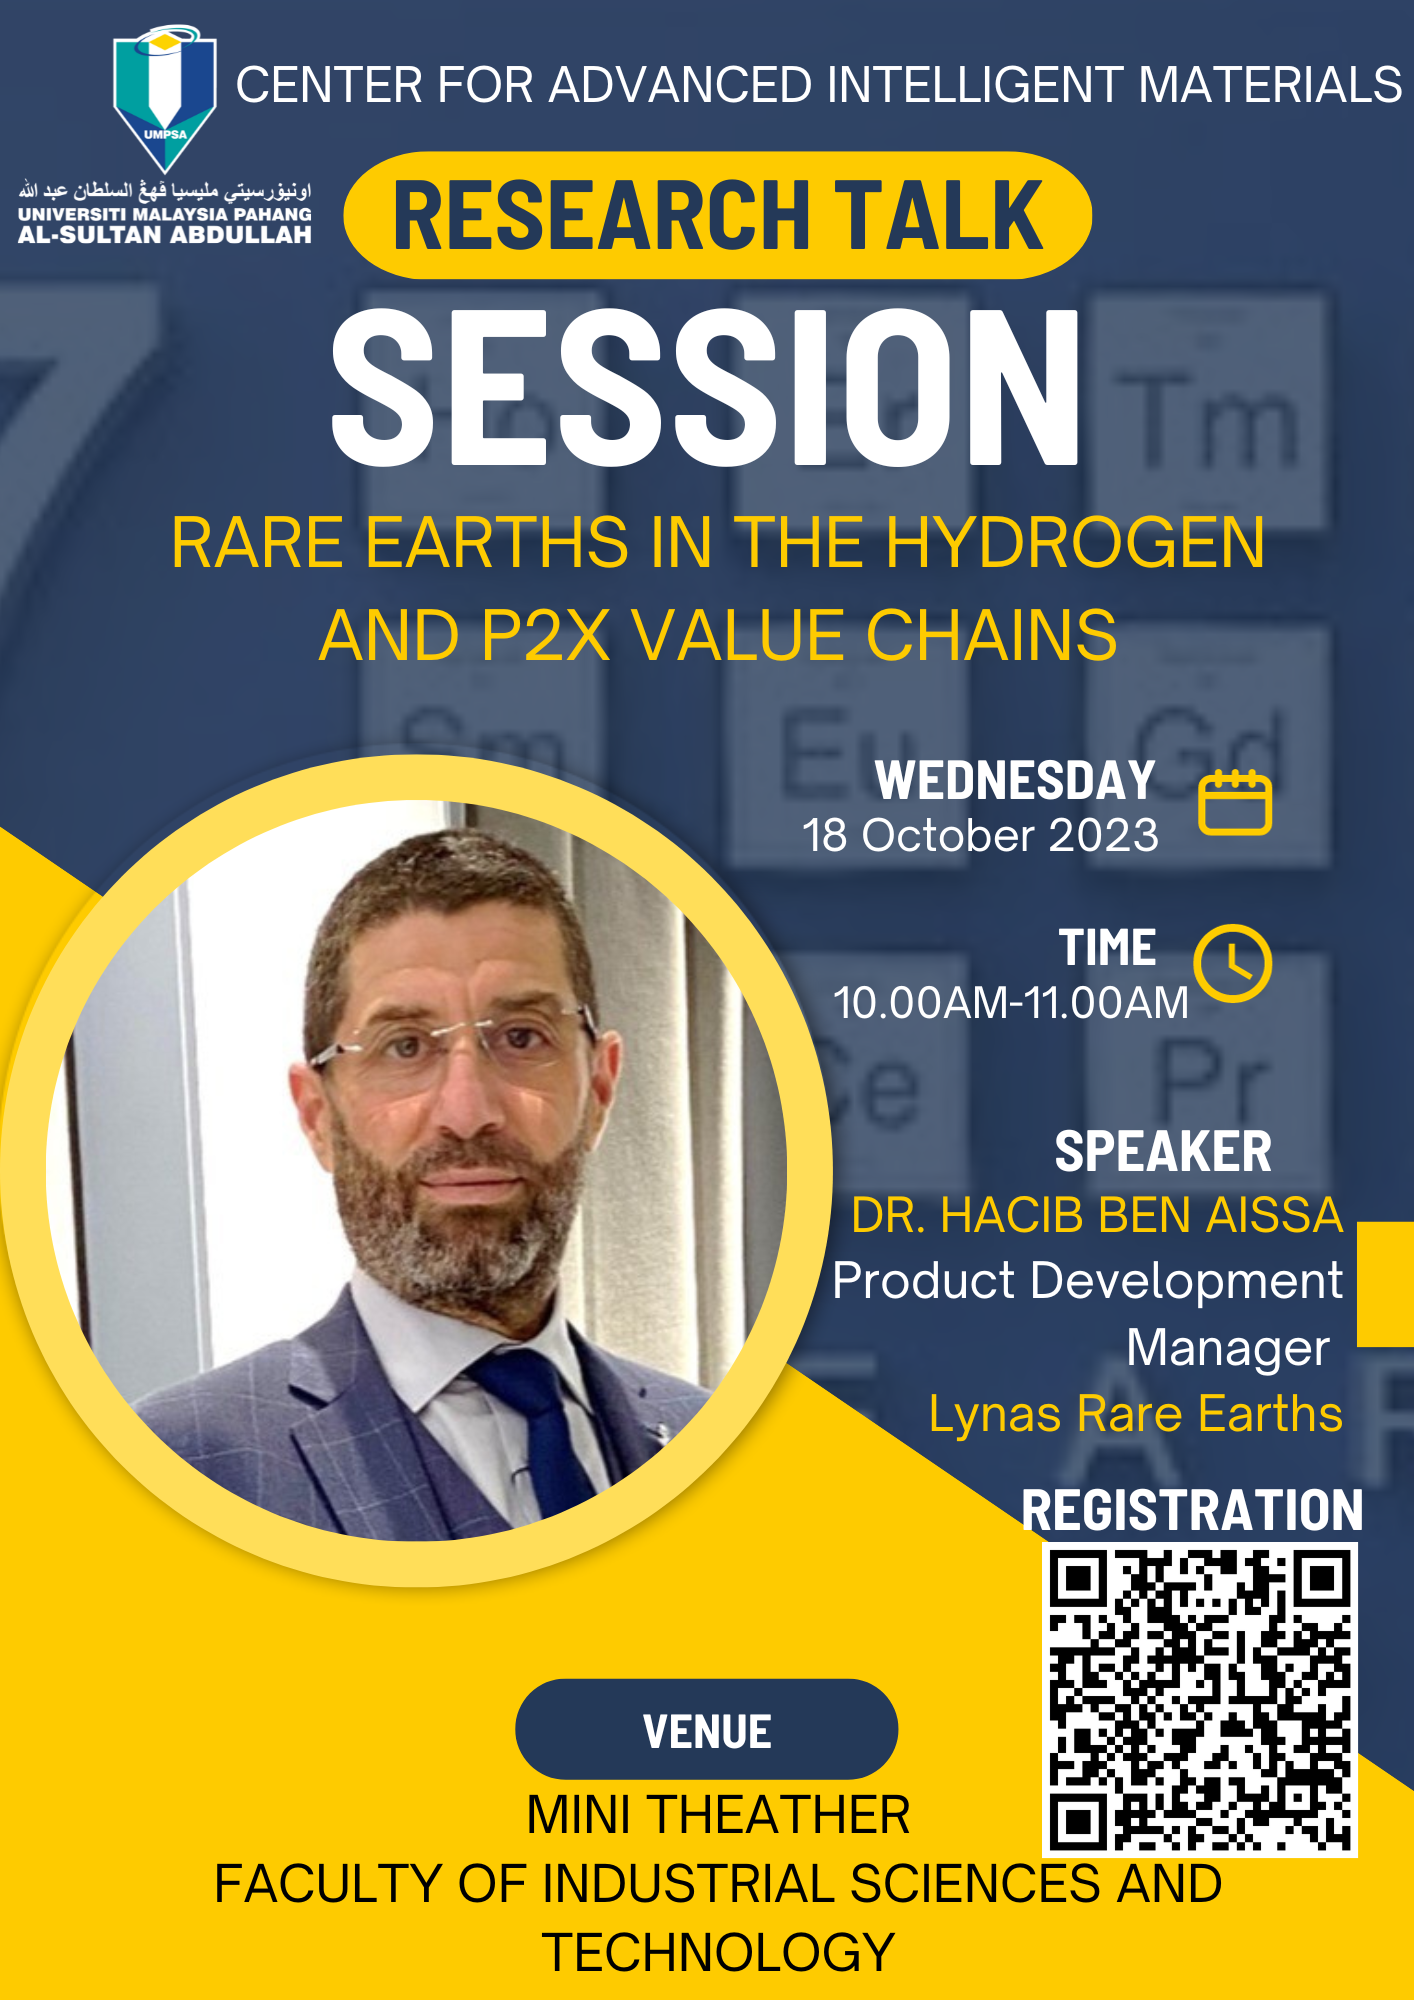 Research Talk session: Rare Earths in the Hydrogen and P2X Value Chains by Dr Hacib Ben Aissa (Product Development Manager, Lynas Rare Earths)